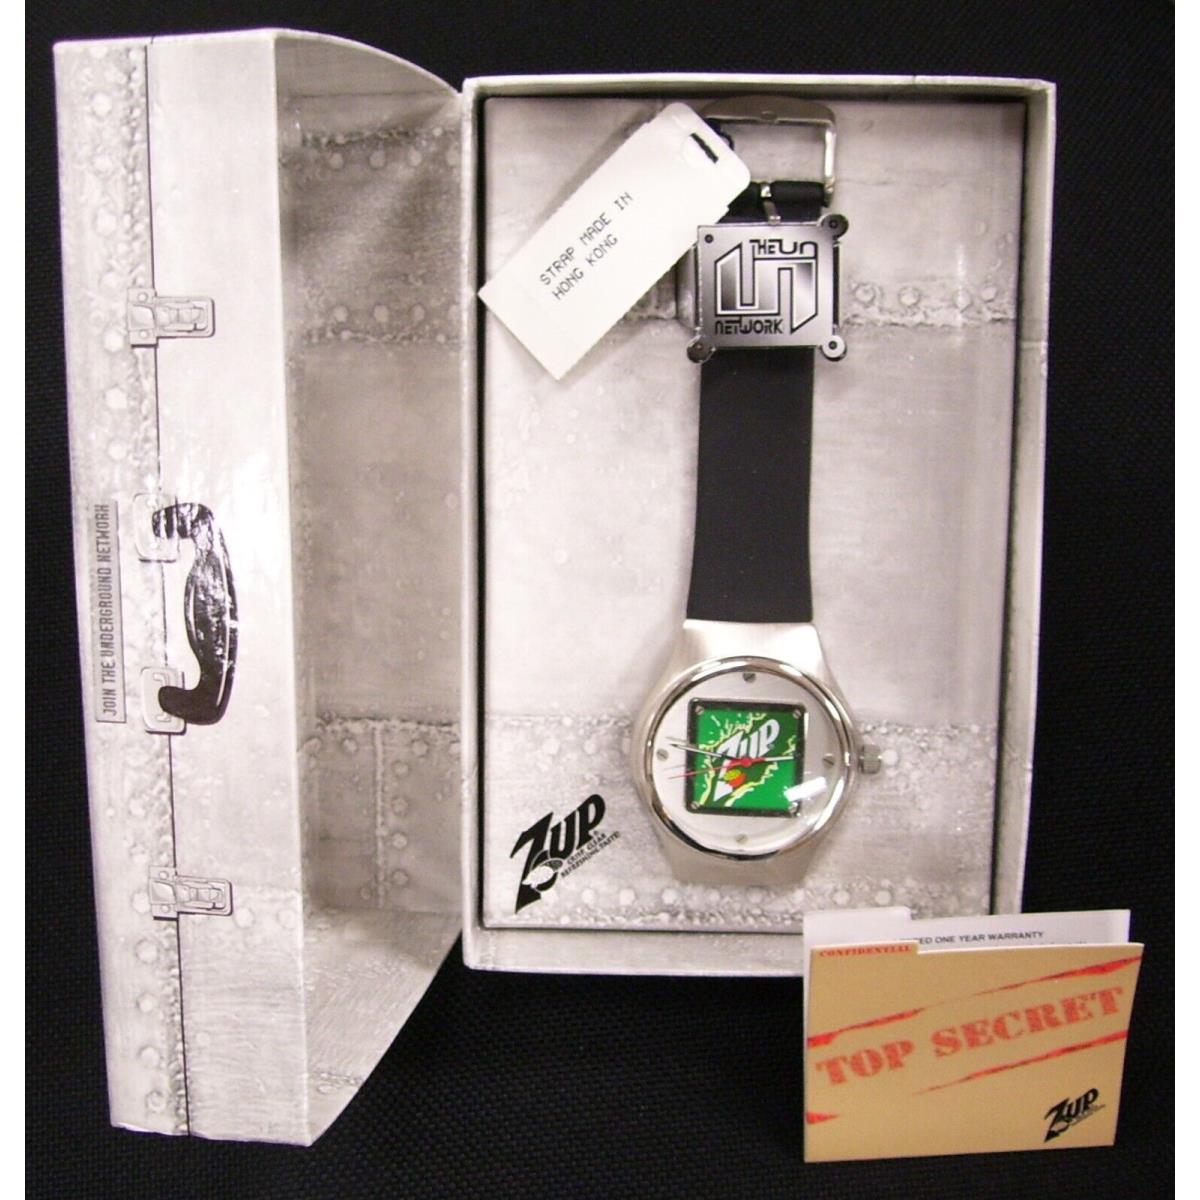 7UP Soda Watch / Black Band and Green Face Vintage Wristwatch | eBay